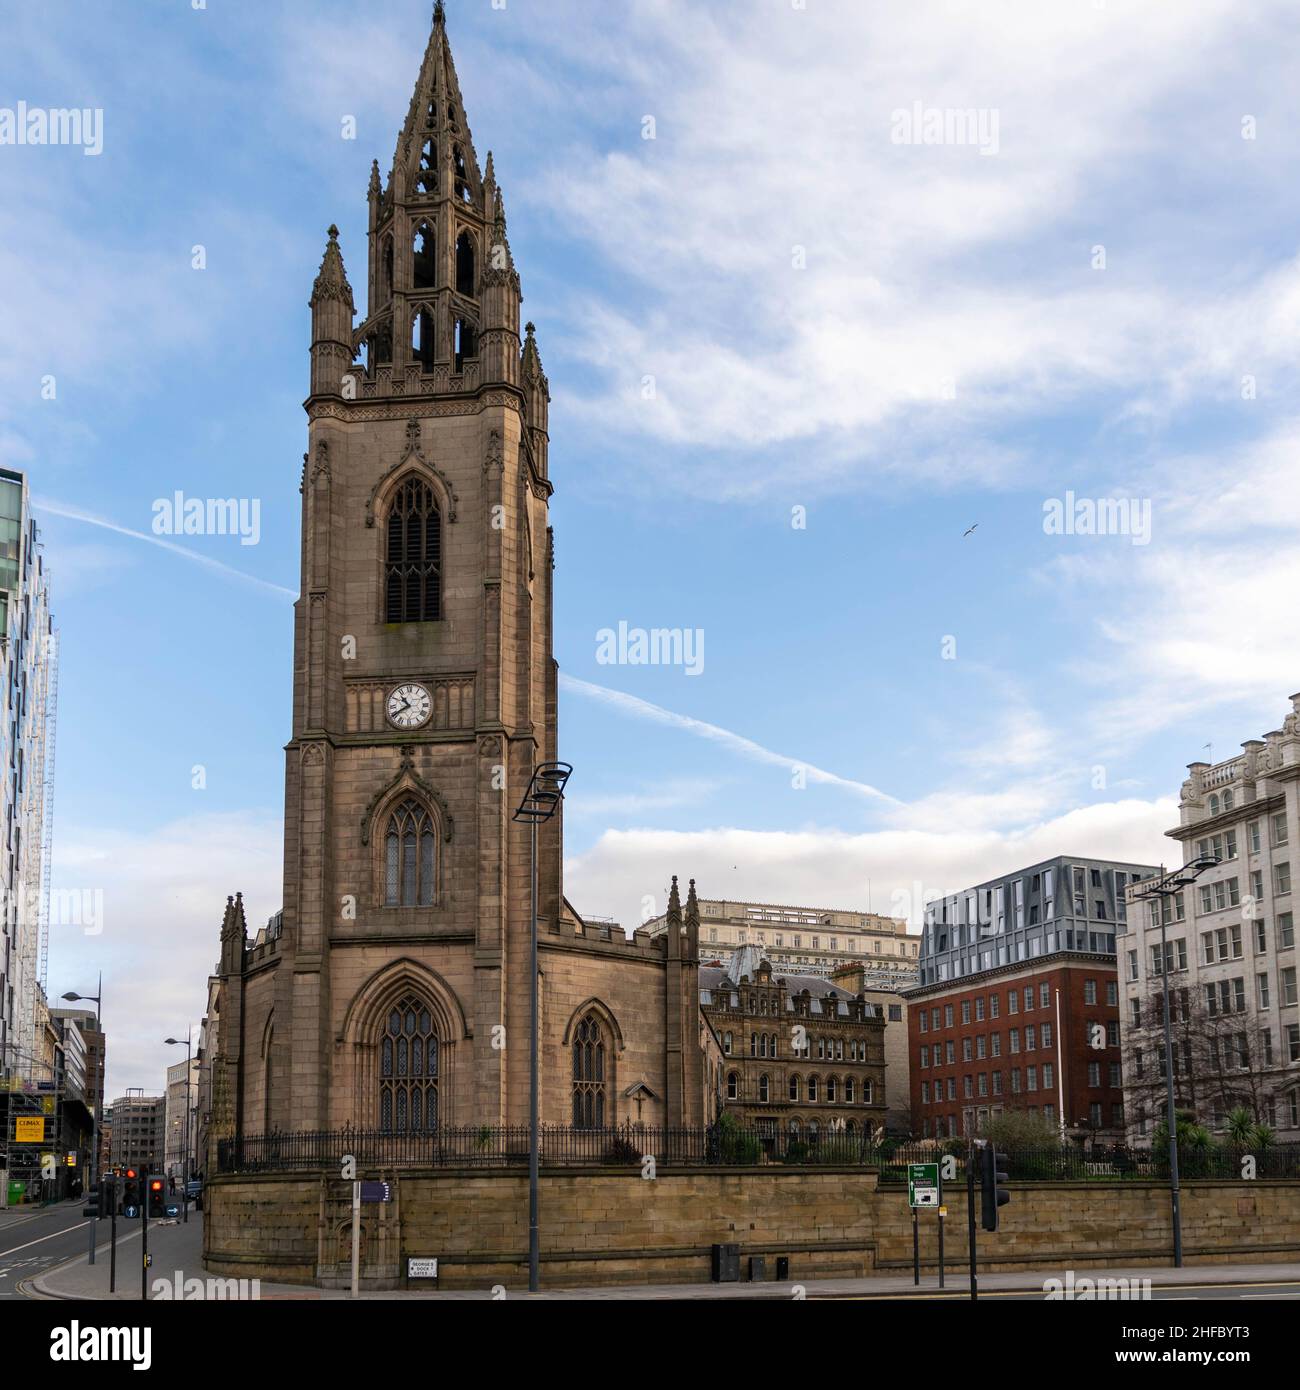 Liverpool, UK - 6 January 2020: The famous Church of St Nicholas, the Anglican parish church of Liverpool. Cityscape in city centre Liverpool near Alb Stock Photo